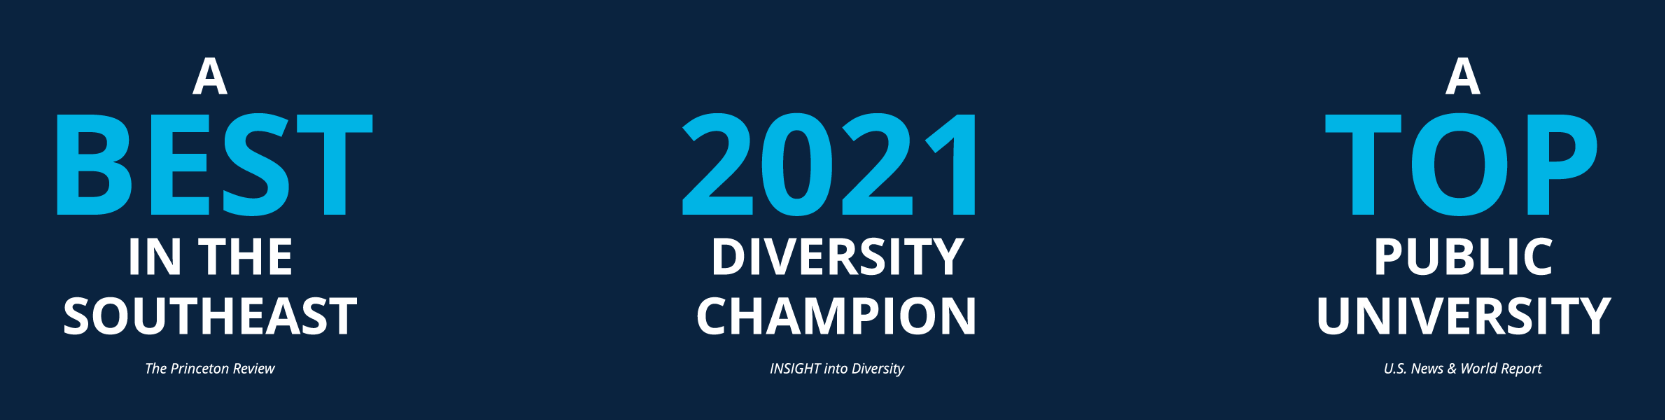 A Best in the Southeast 2021 Diversity Champion Insight into Diversity A Top Public University US News and World Report